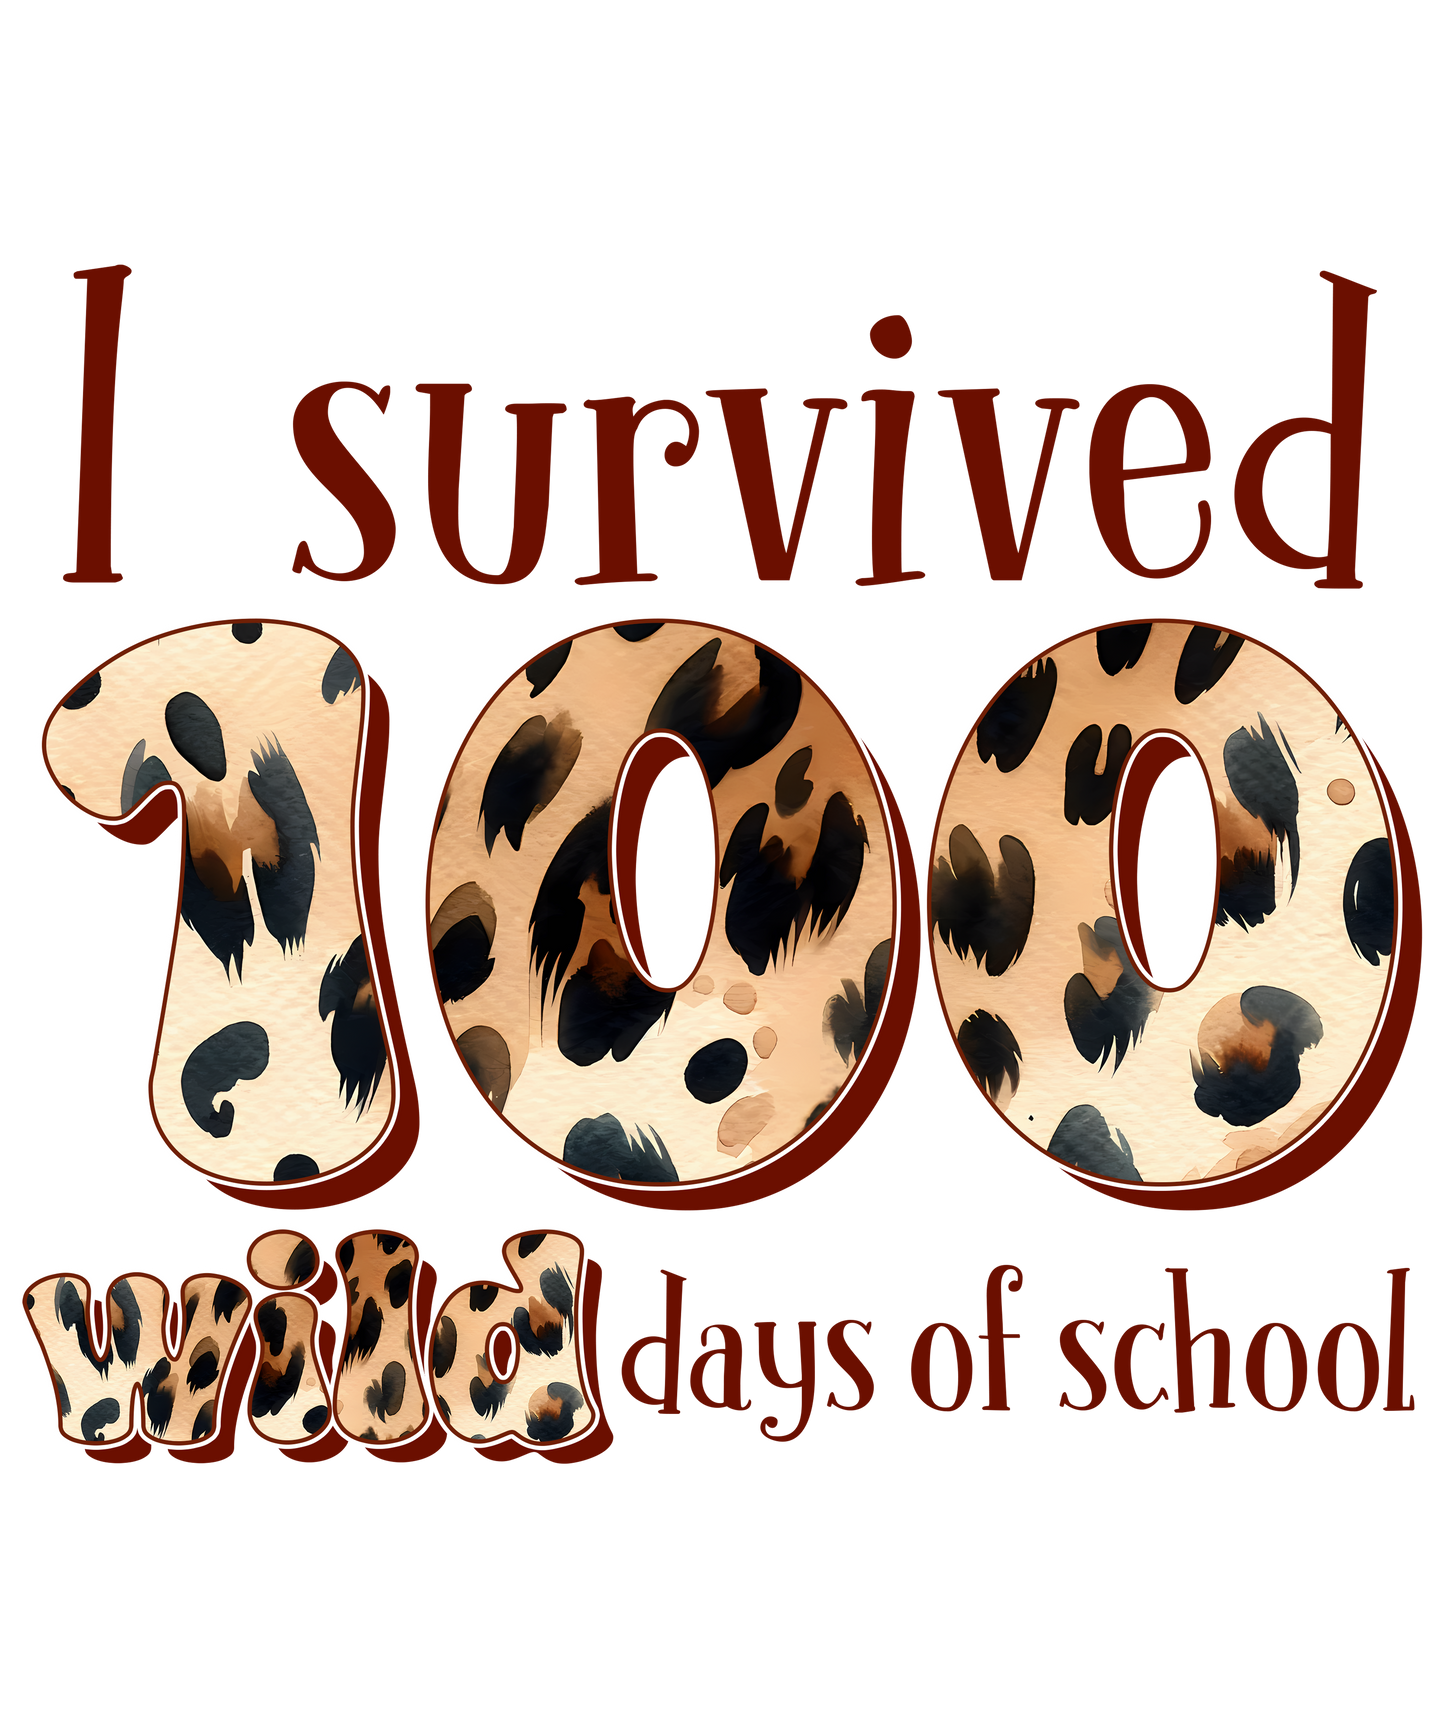 i survived 100 day of school t shirt design dtf dallas ready to press